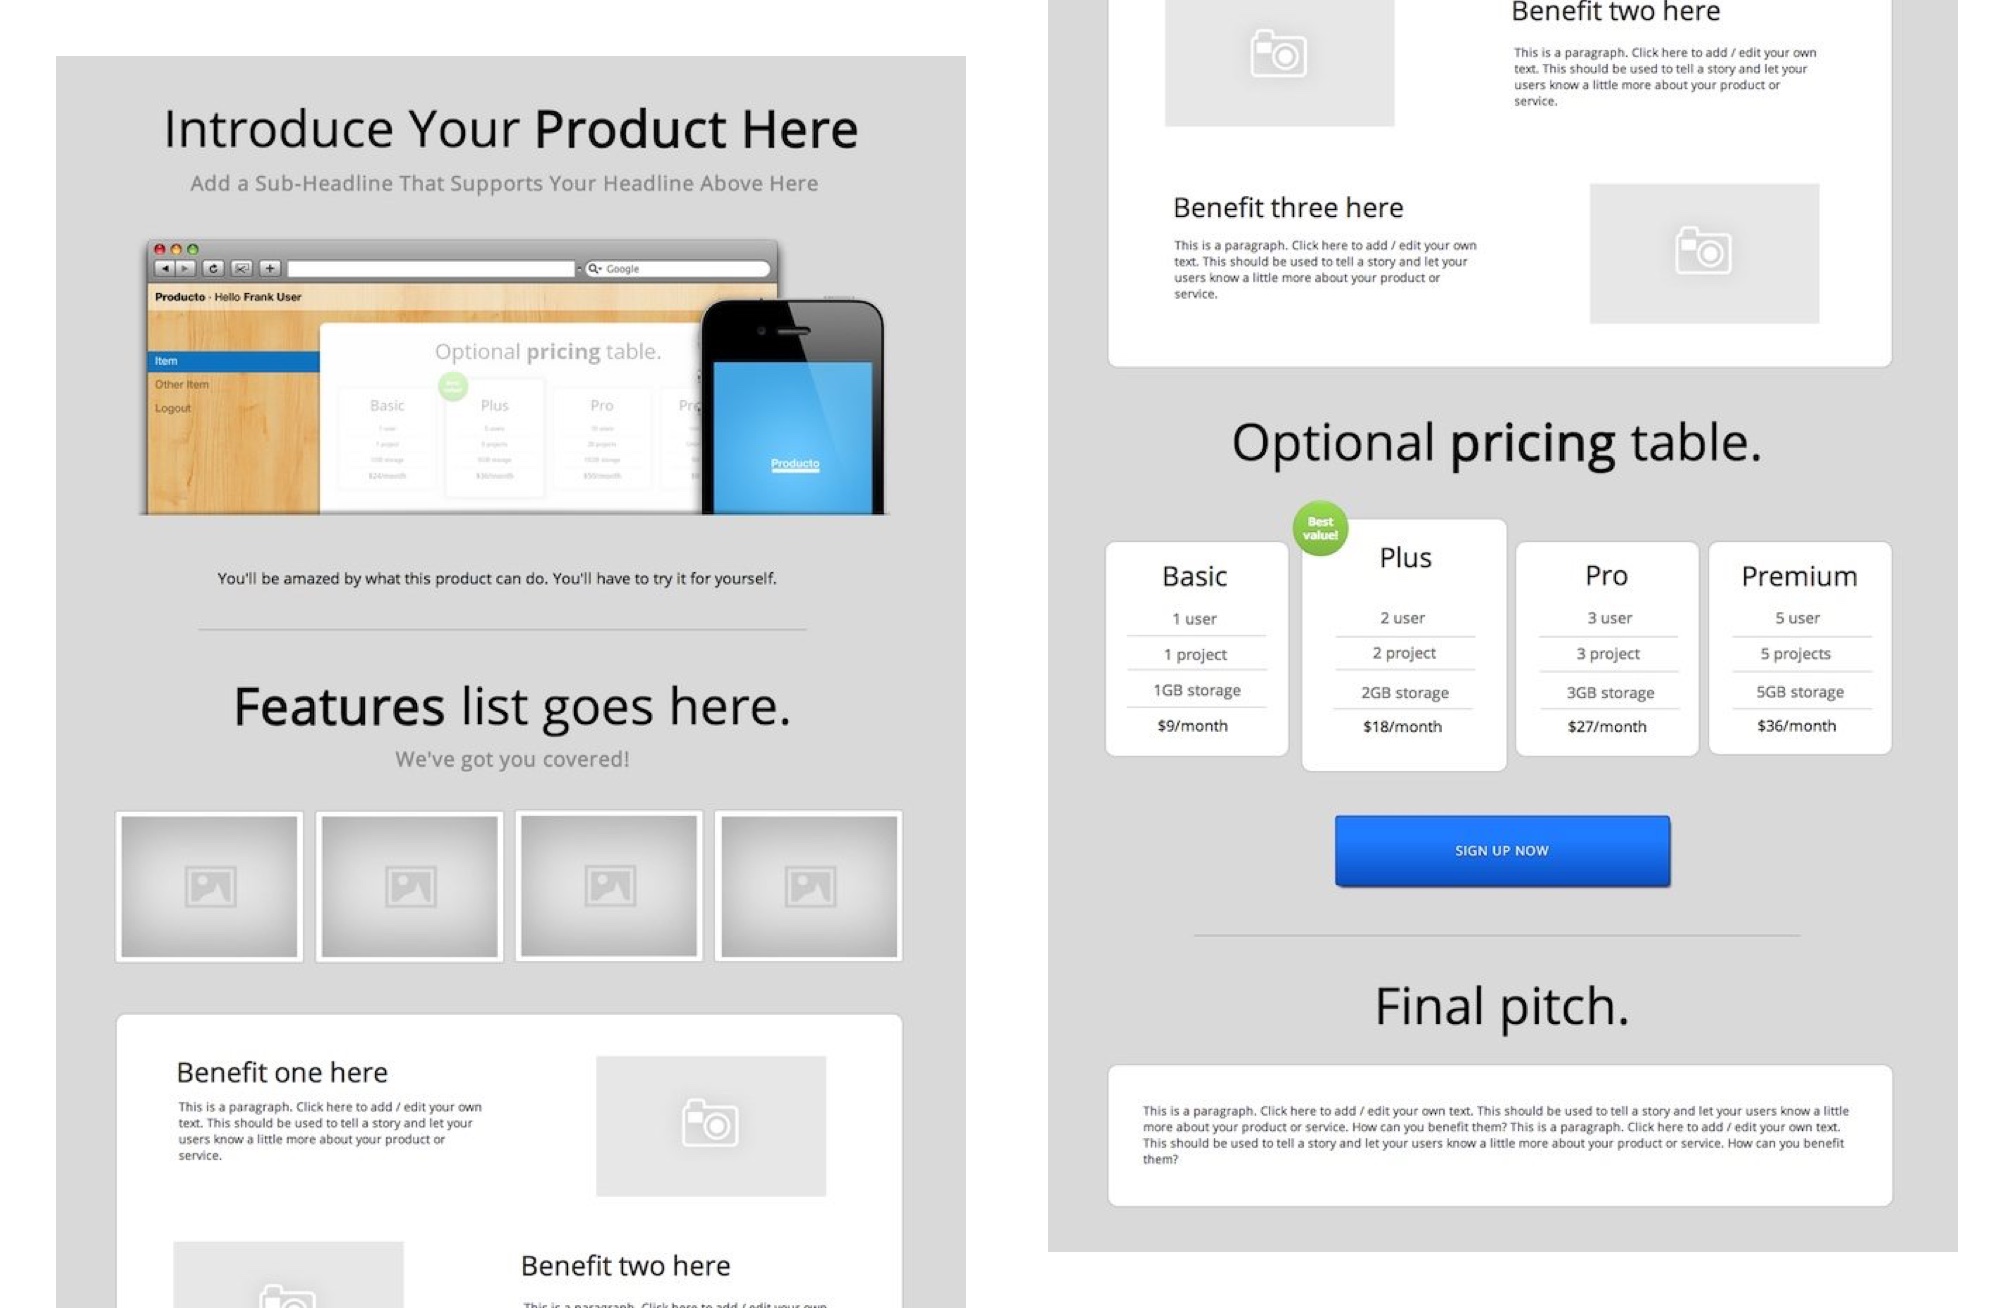 Conventional Landing Page Design